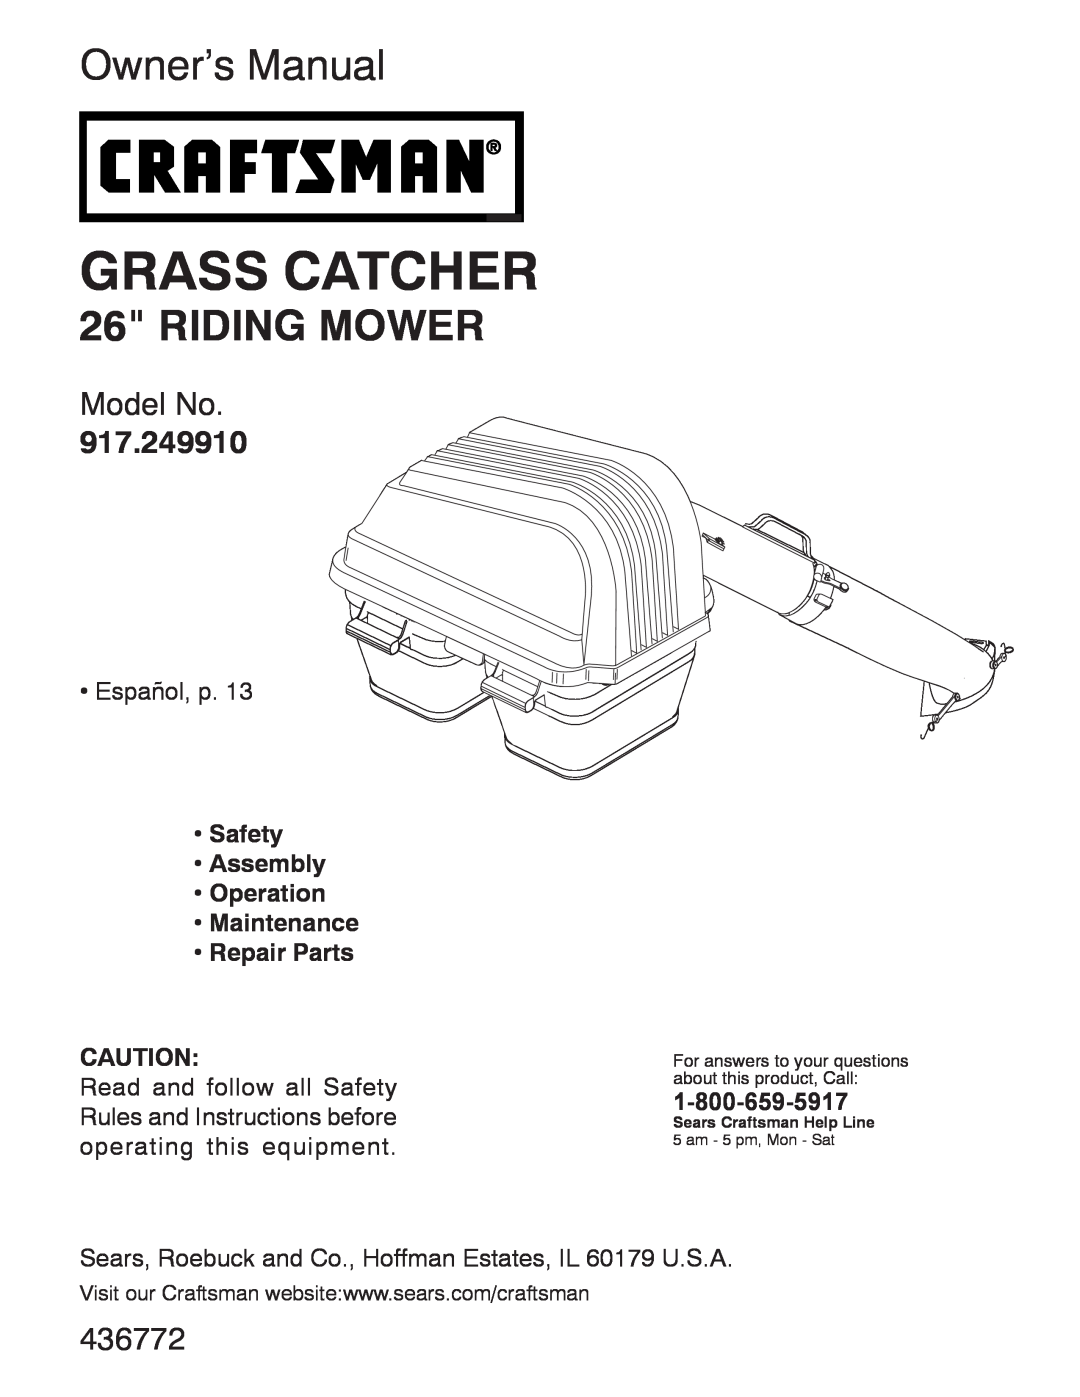 Craftsman 917.24991 manual Riding Mower, Safety Assembly Operation Maintenance, Repair Parts, Grass Catcher, Model No 